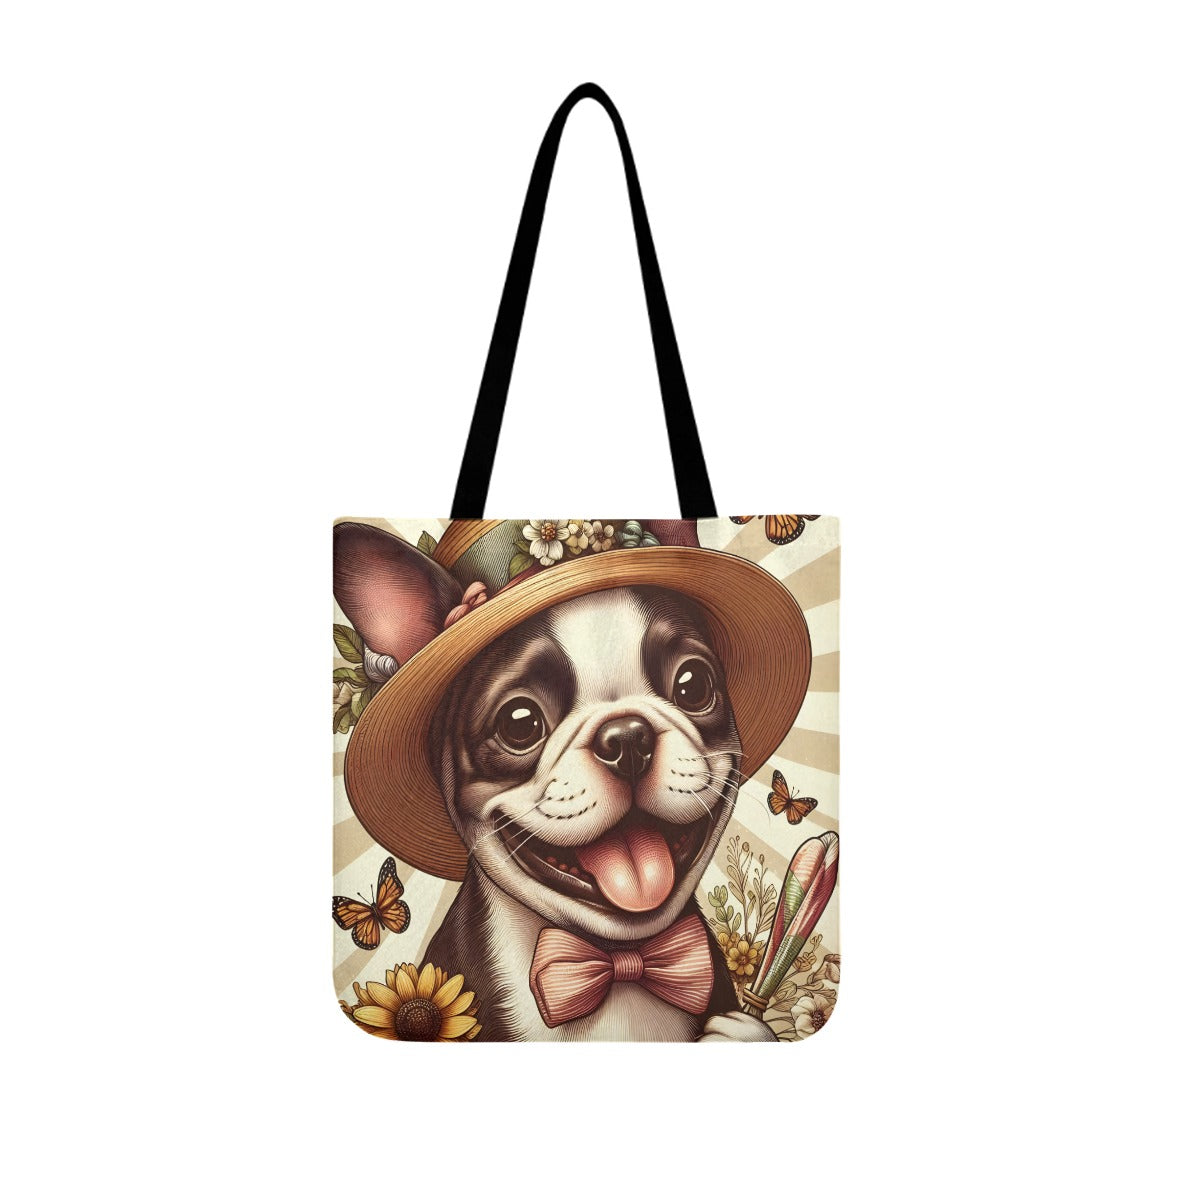 Twinkie - Cloth Tote Bags for Boston Terrier lovers